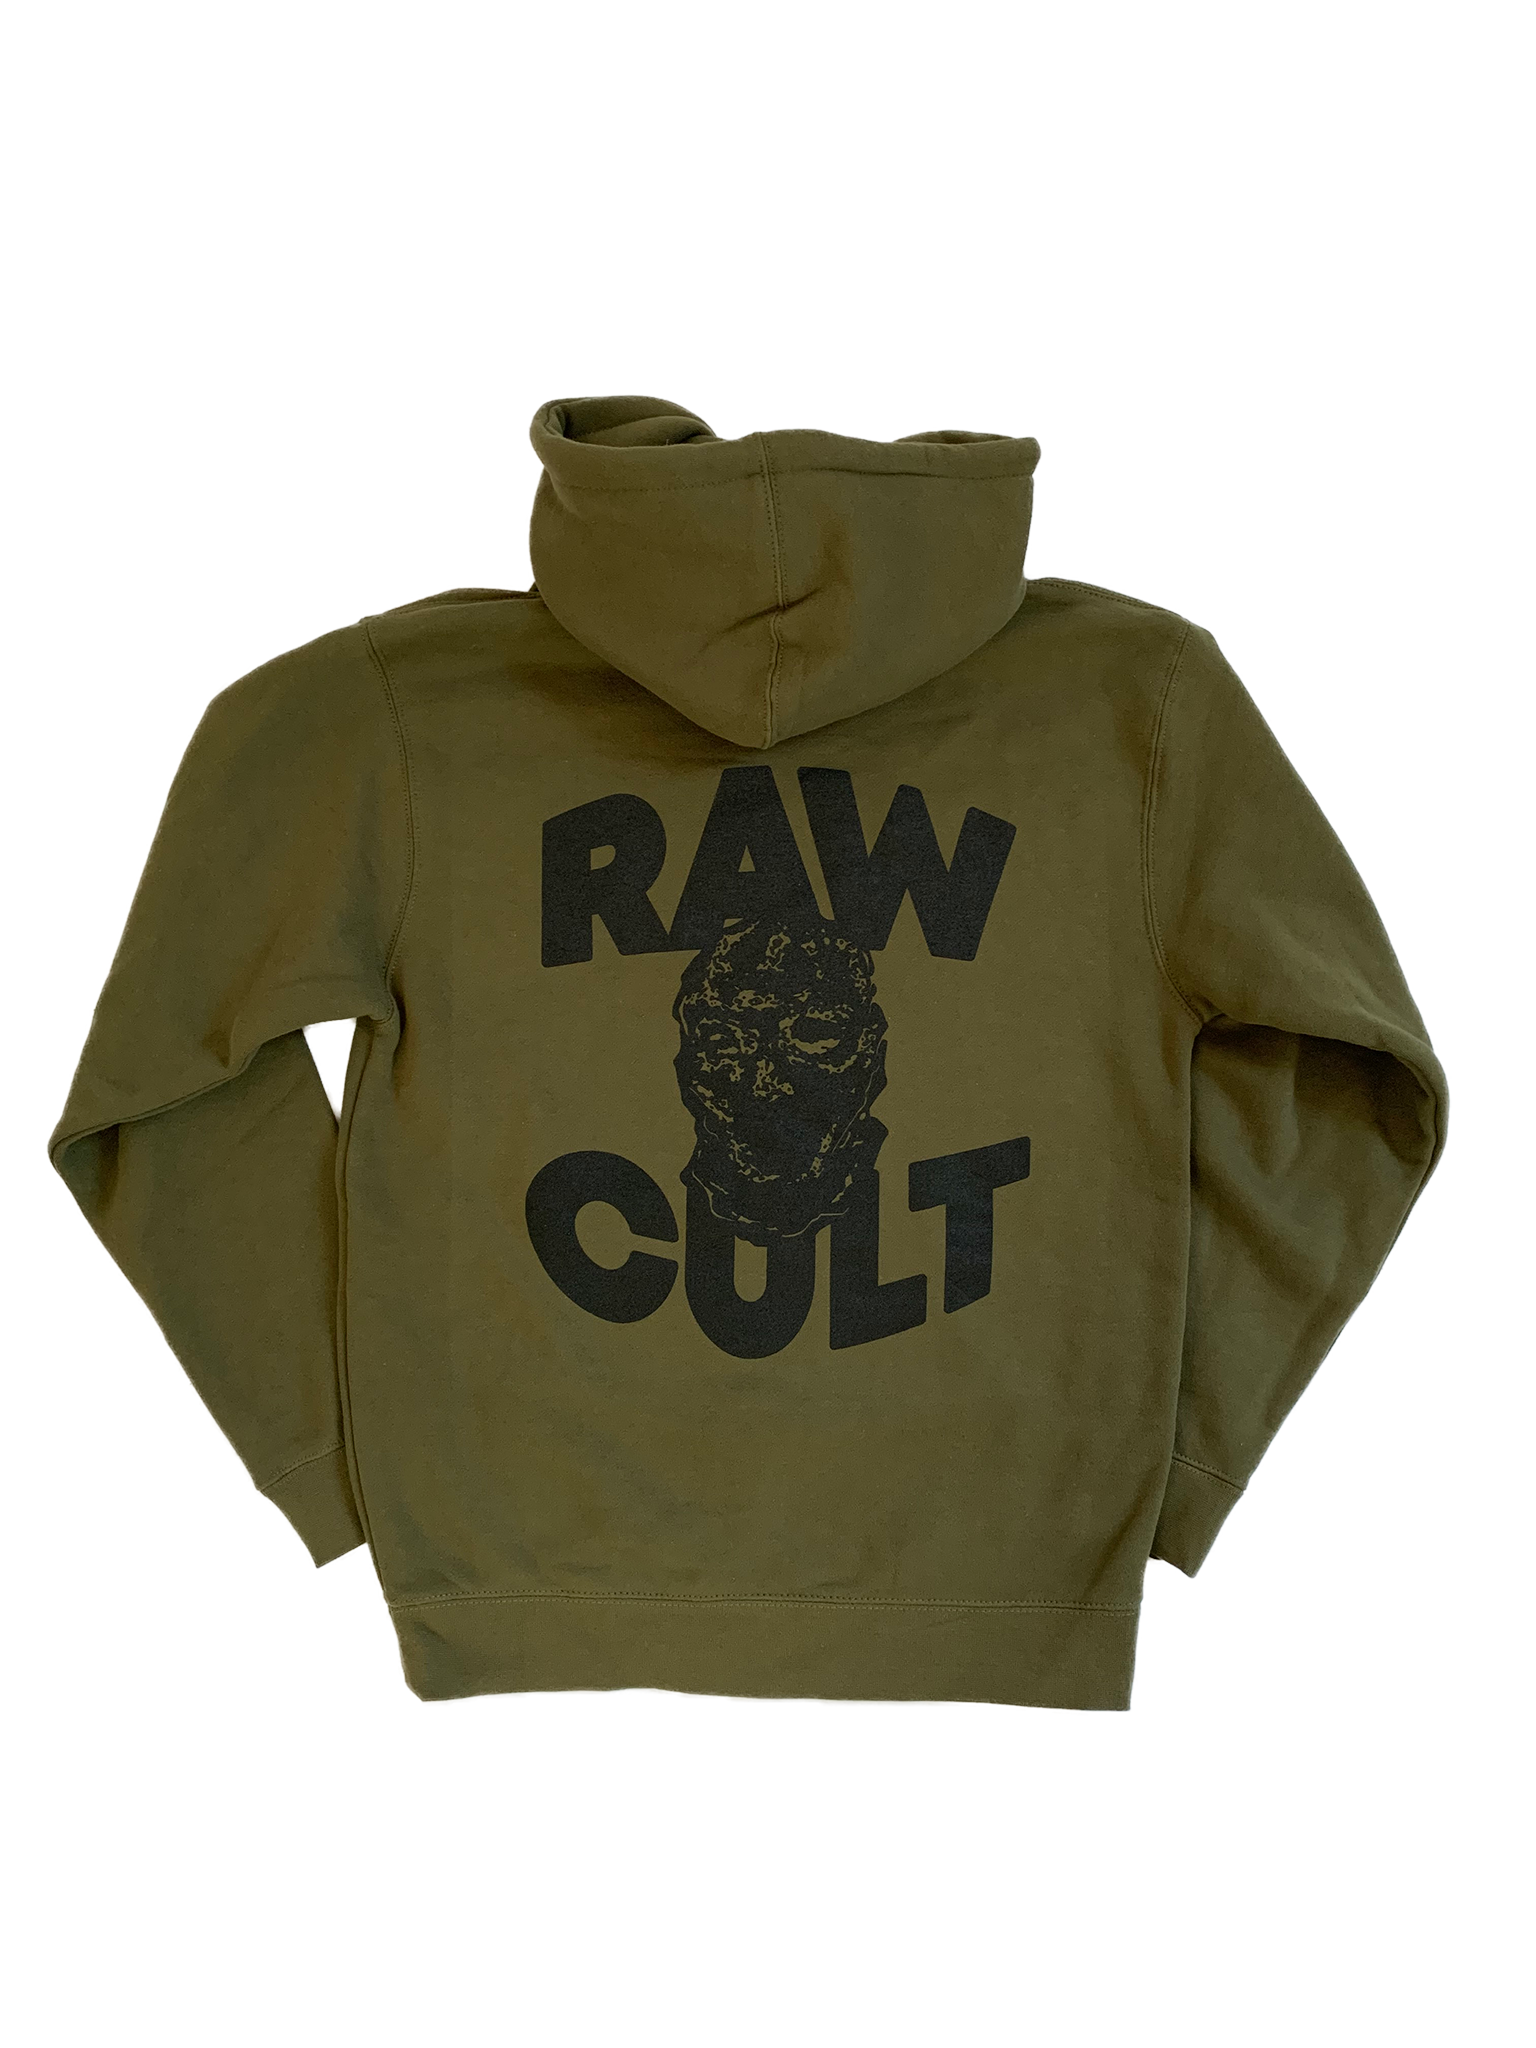 RAW CULT | Mask CULT Hoodie - Military Green